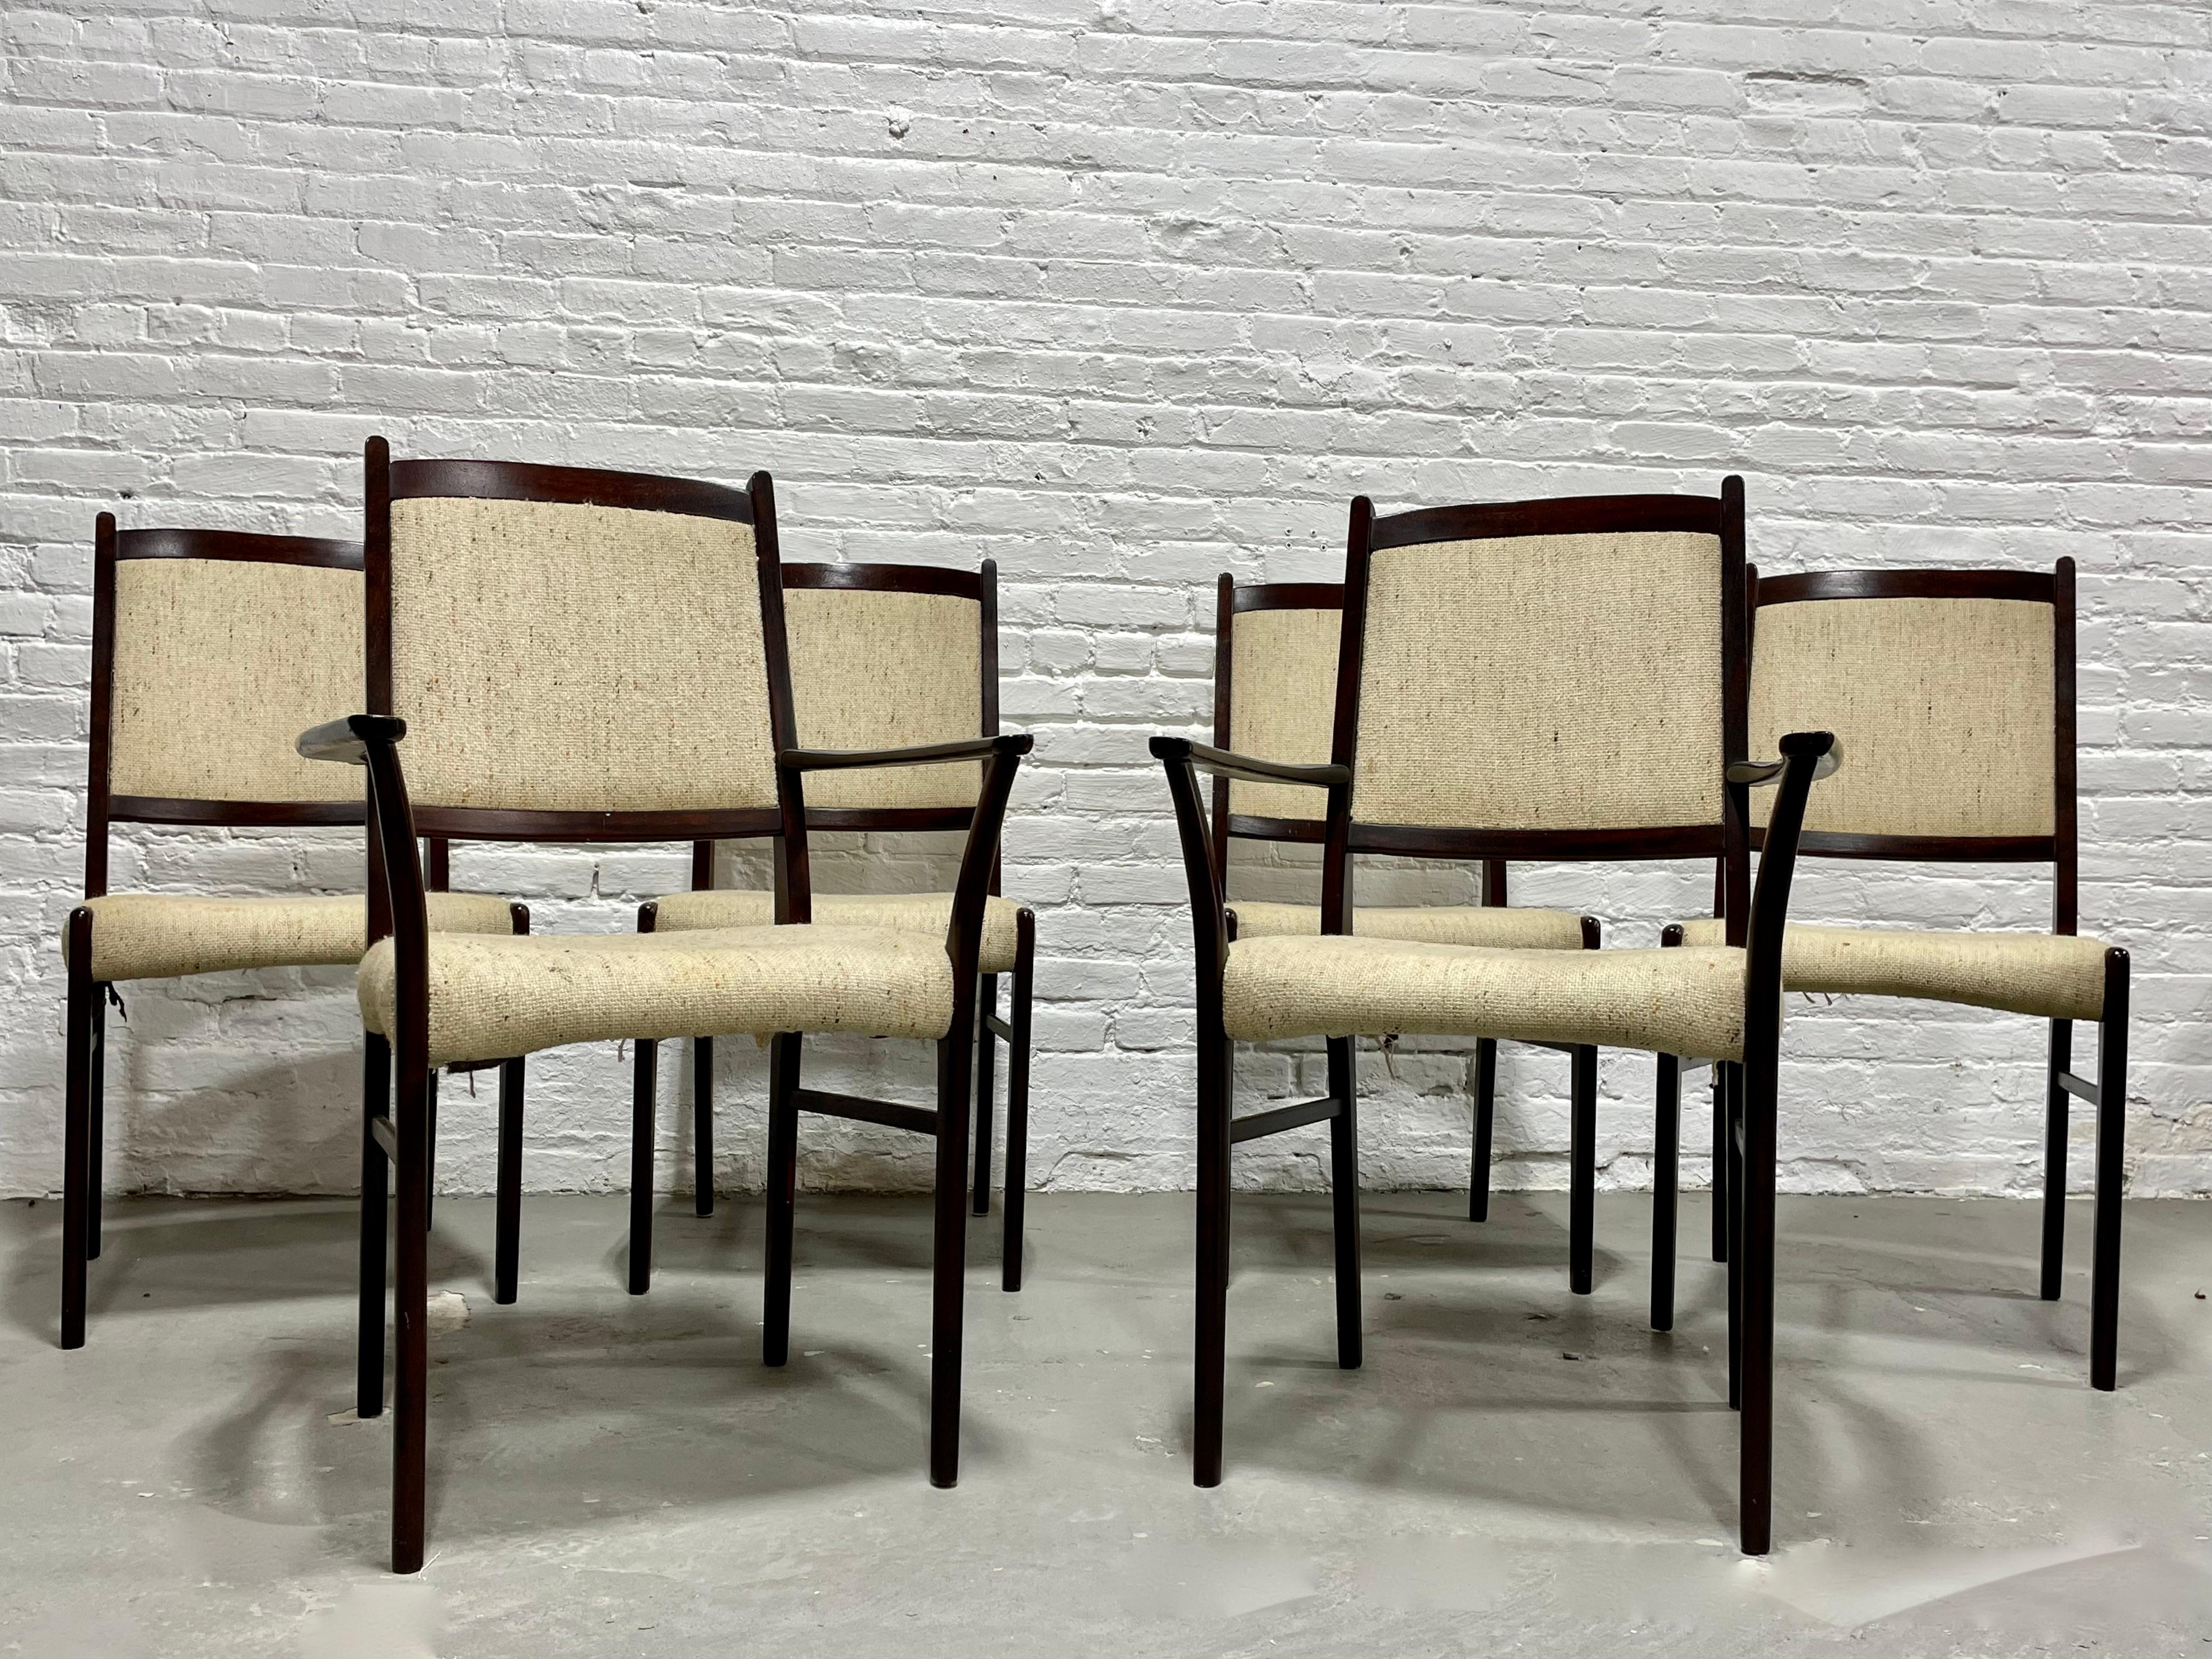 Set of Six Danish Mid-Century Modern rosewood dining chairs, circa 1960s. Simple, clean lines + perfect design featuring lovely oatmeal upholstery. Constructed in rosewood and its deep, rich color and stunning wood grains will add depth and design